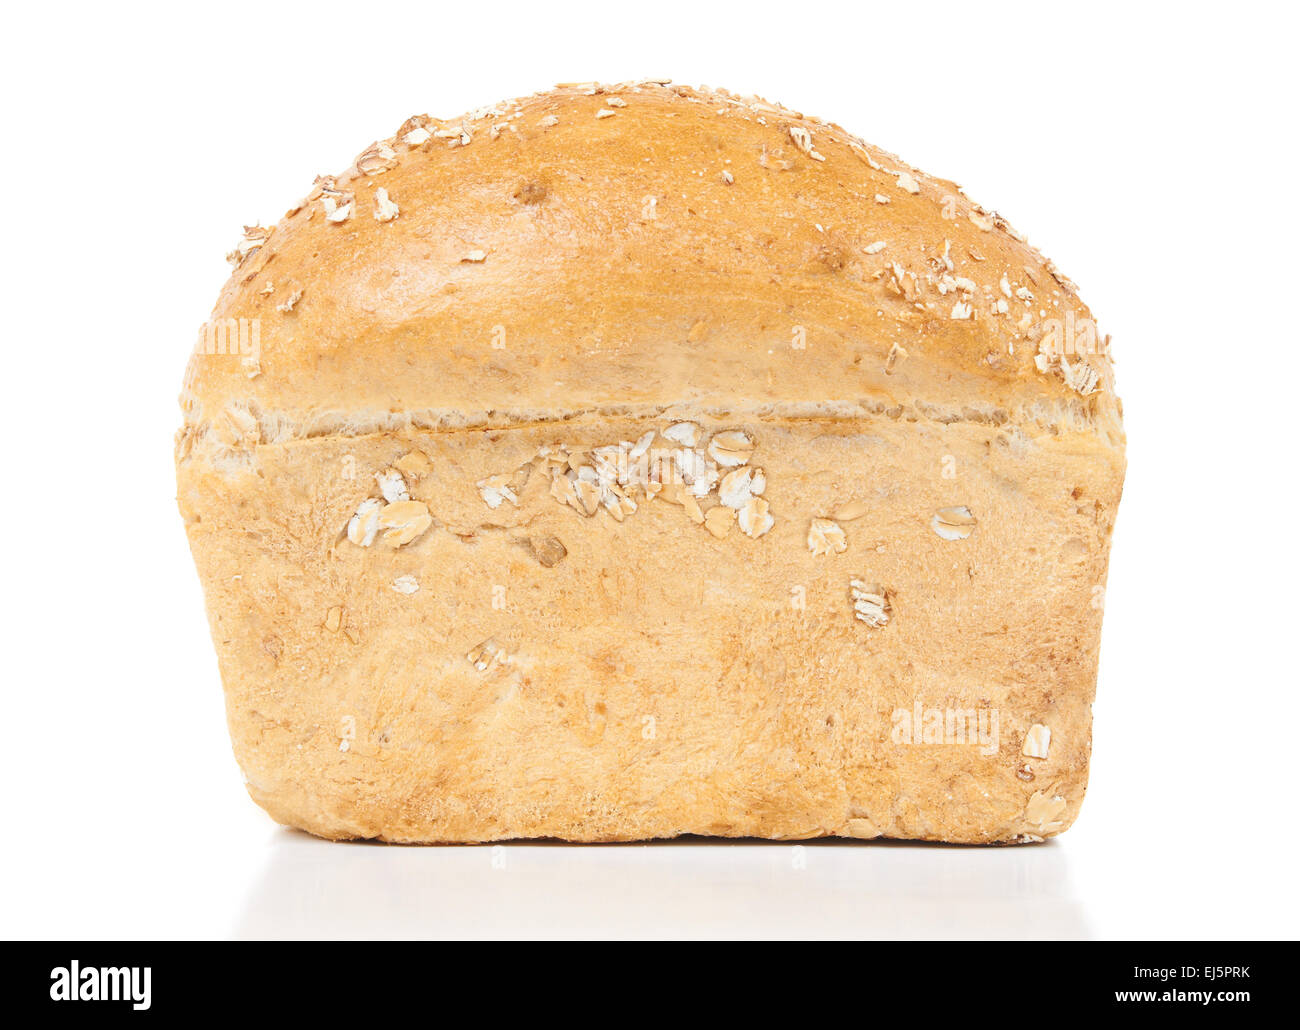 Loaf of bread with oats isolated on white Stock Photo